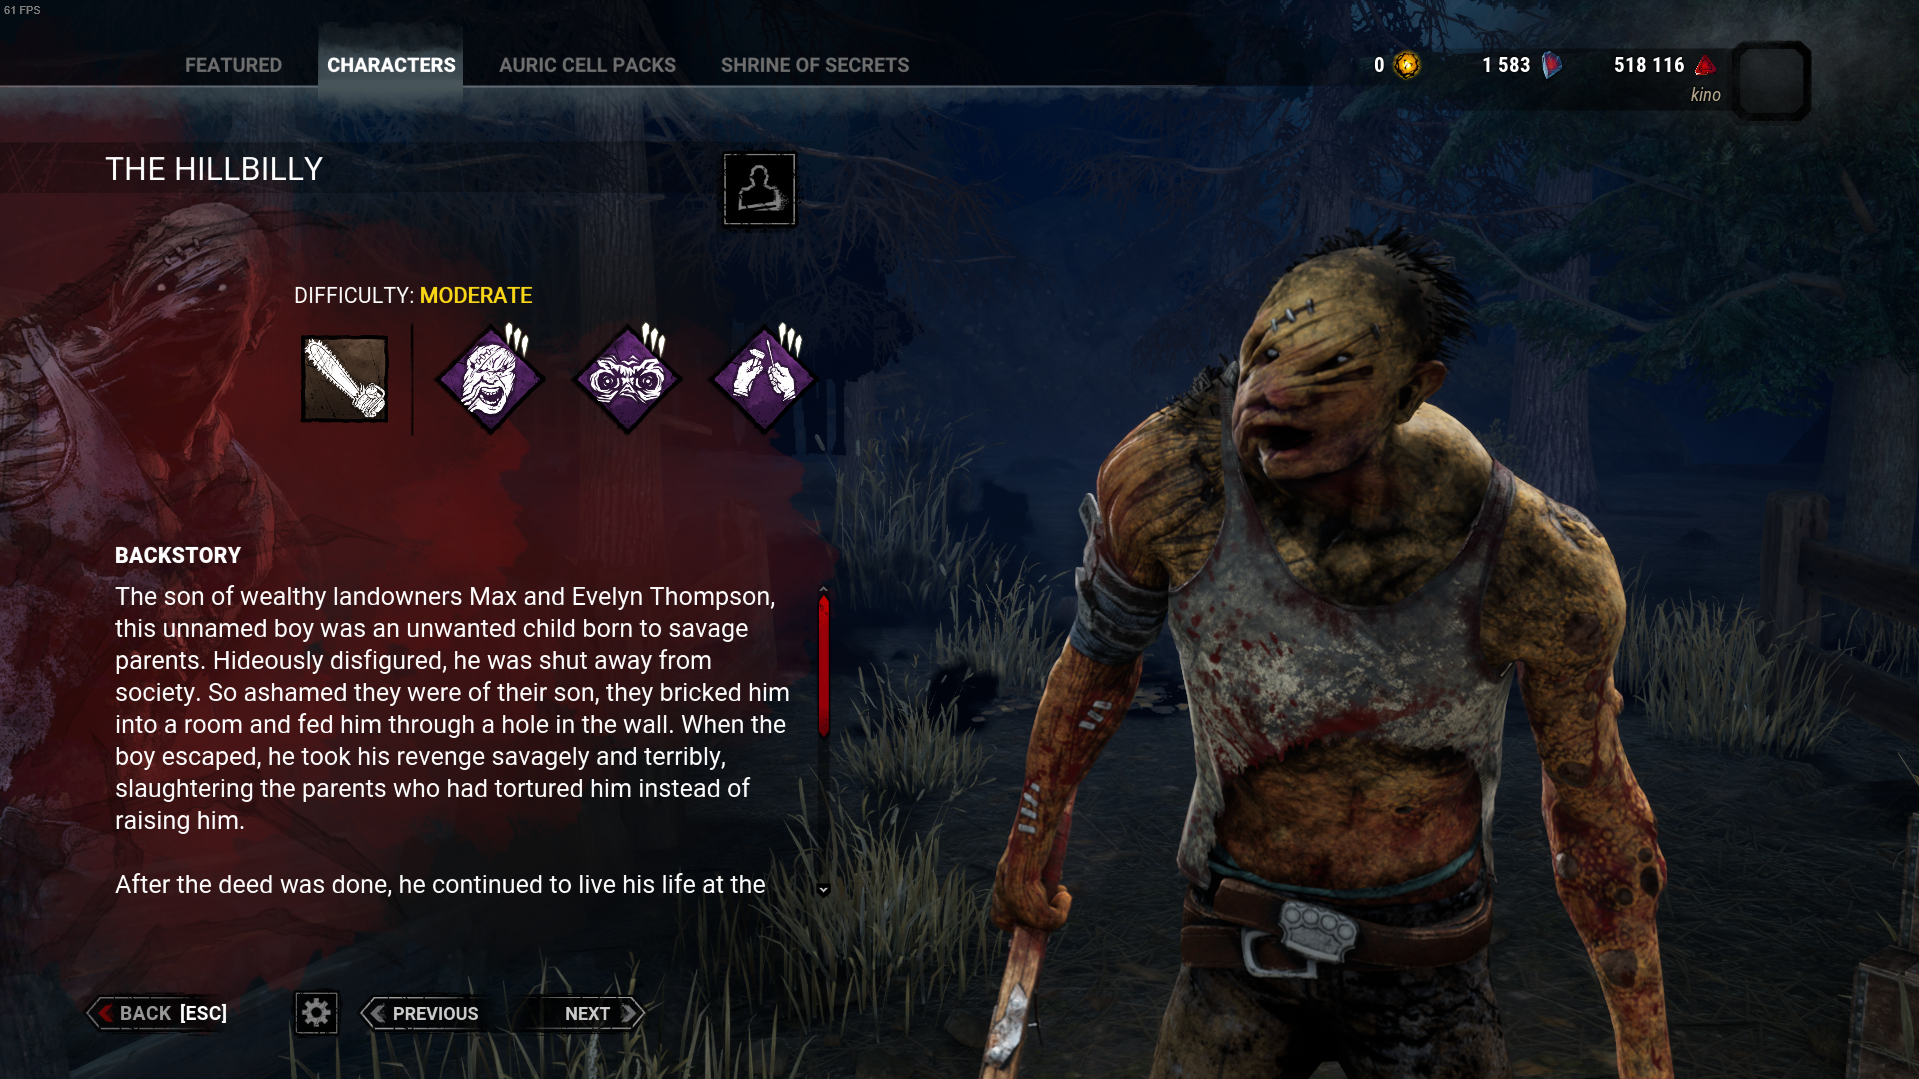 Overview of the Hillbilly killer in Dead by Daylight.